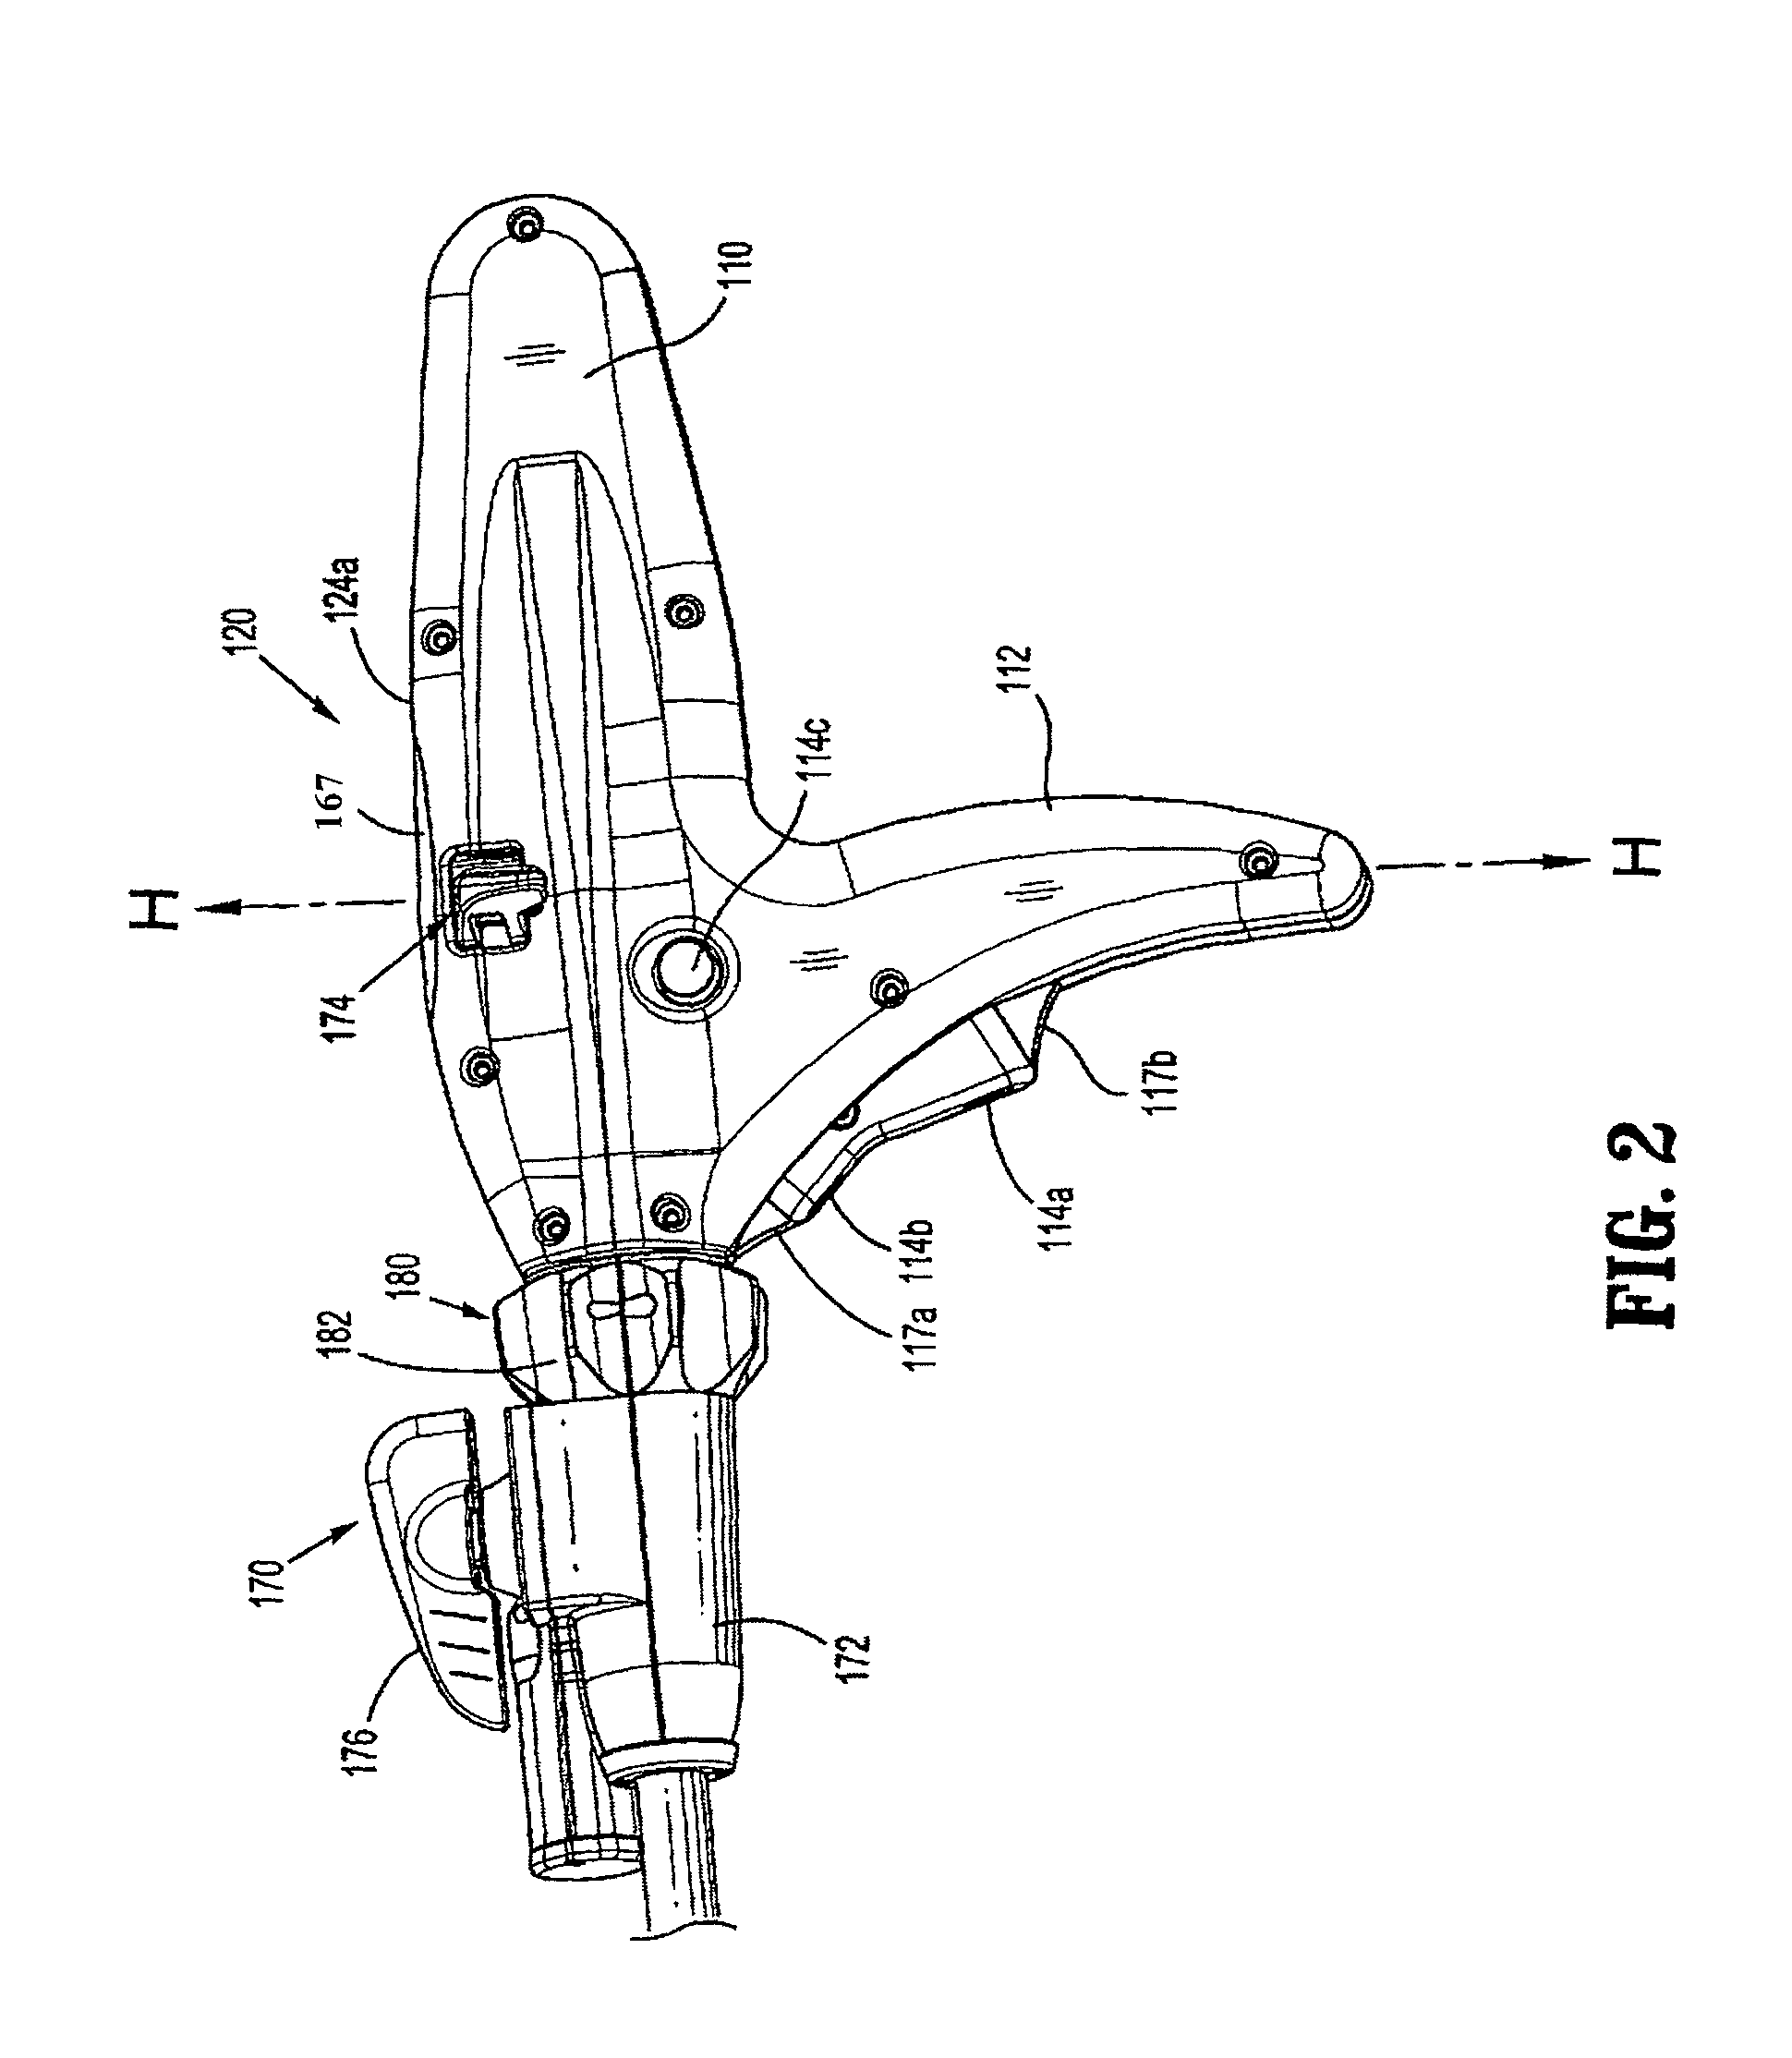 Method and apparatus for determining parameters of linear motion in a surgical instrument